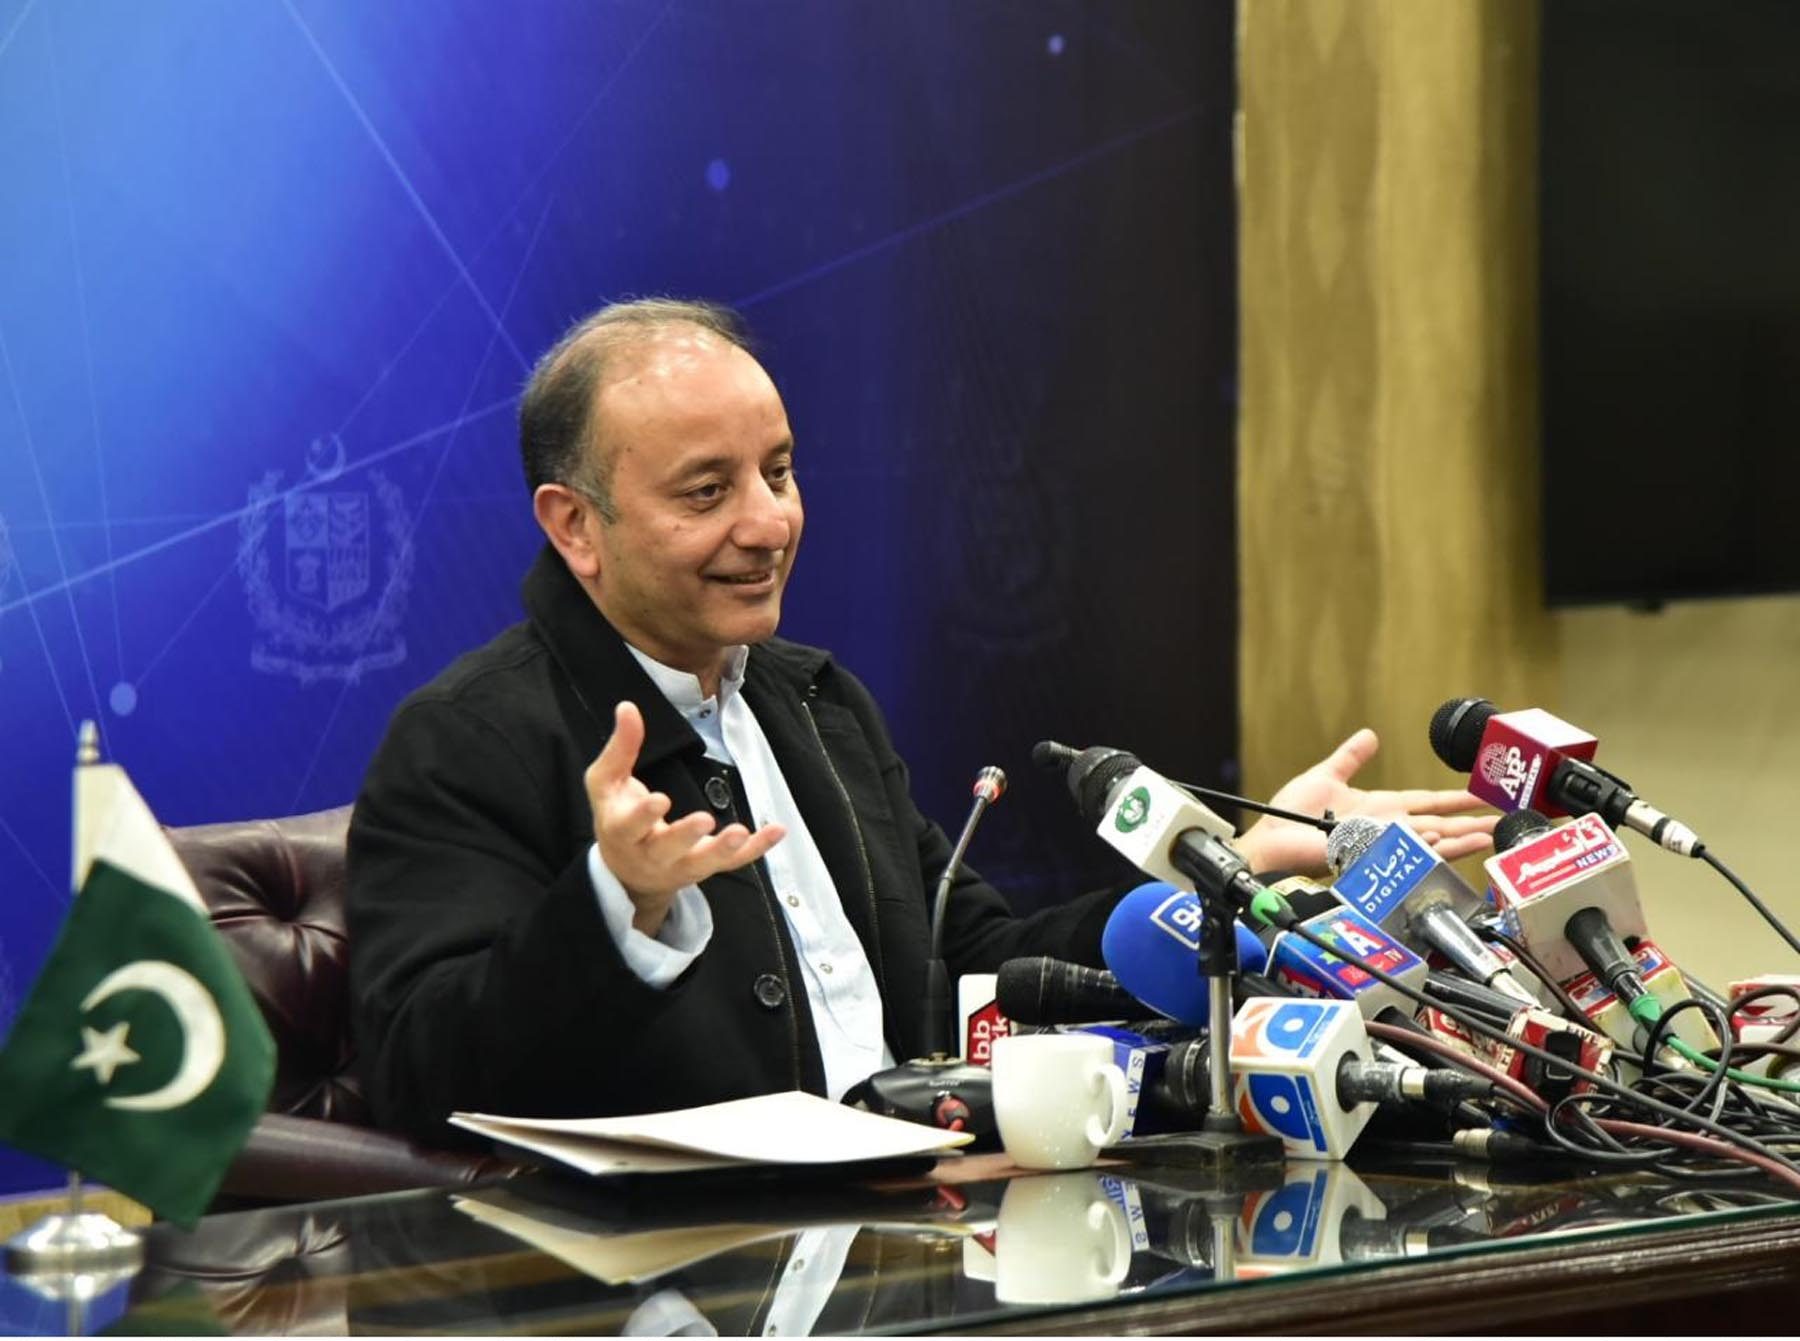 Minister of State for Petroleum, Dr Musadik Malik adressing press conference in Islamabad on December 05, 2022